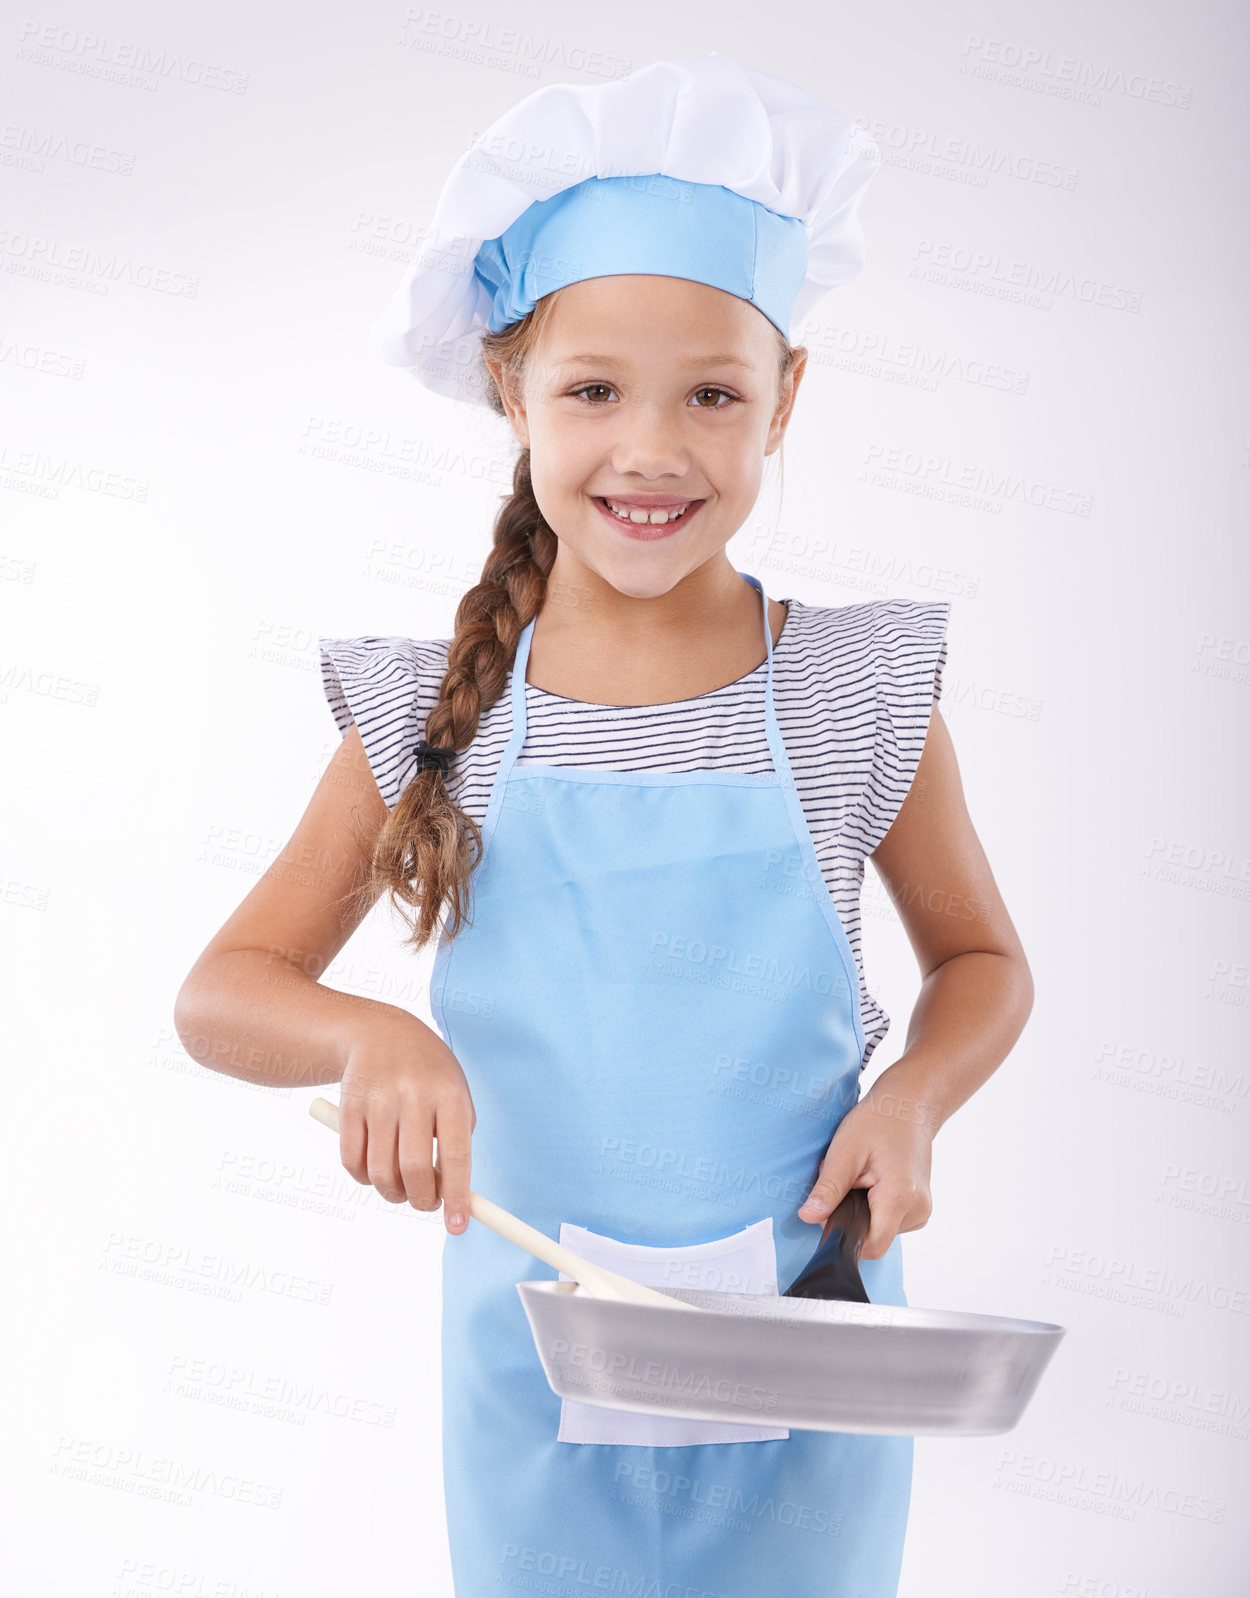 Buy stock photo Kid, chef and portrait with pan, confident and child development on white background. Culinary skills, happy and learning to cook food and childhood growth with confidence in hospitality industry